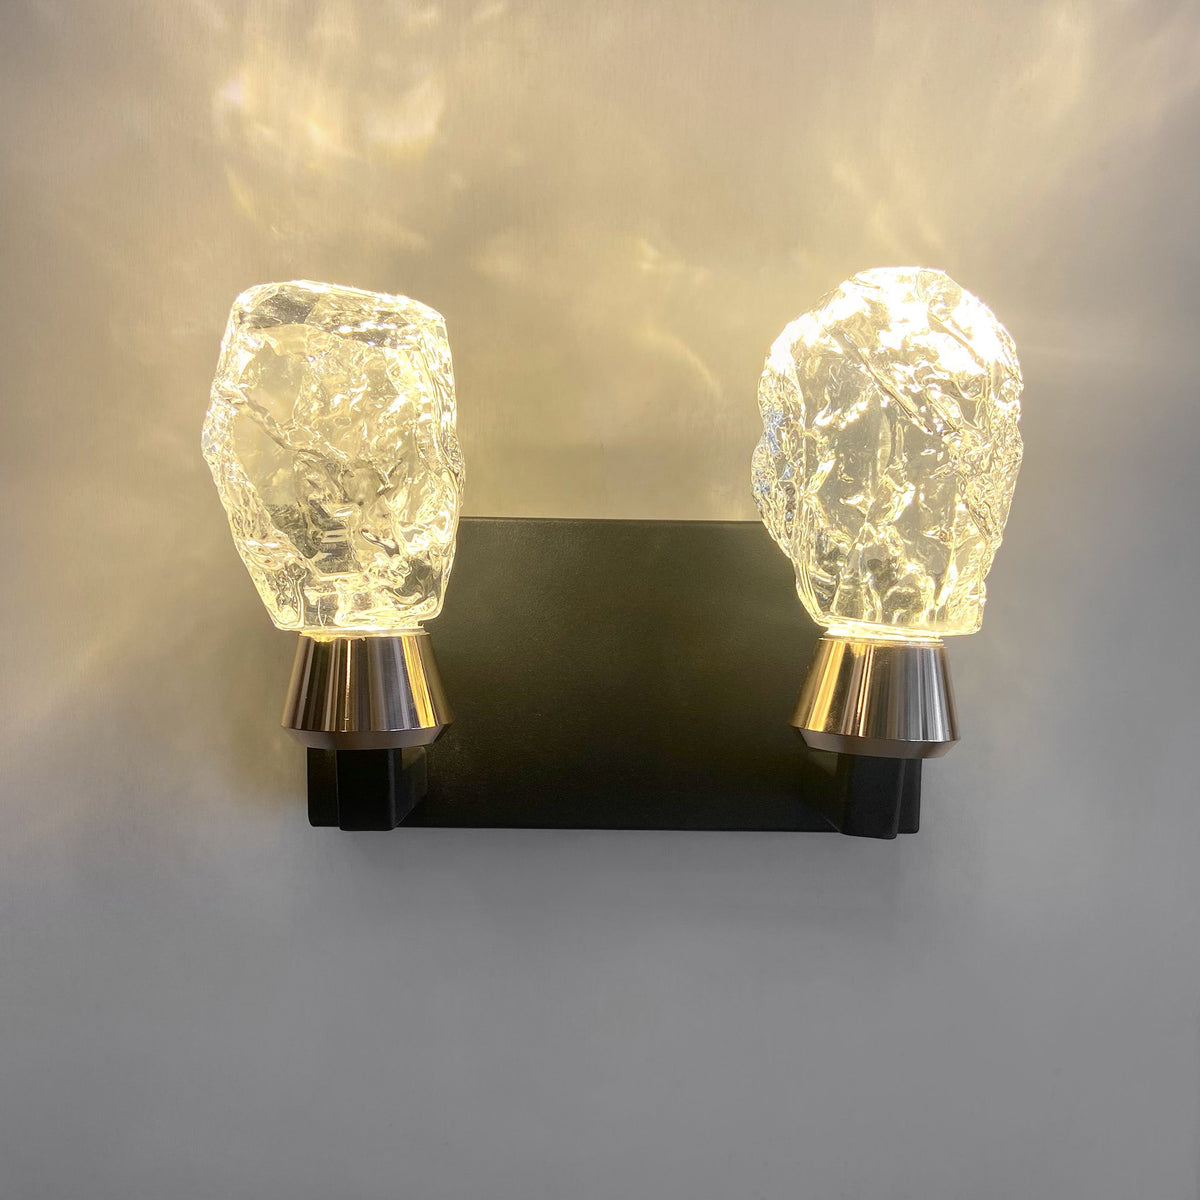 Double Citrine Wall Light Store